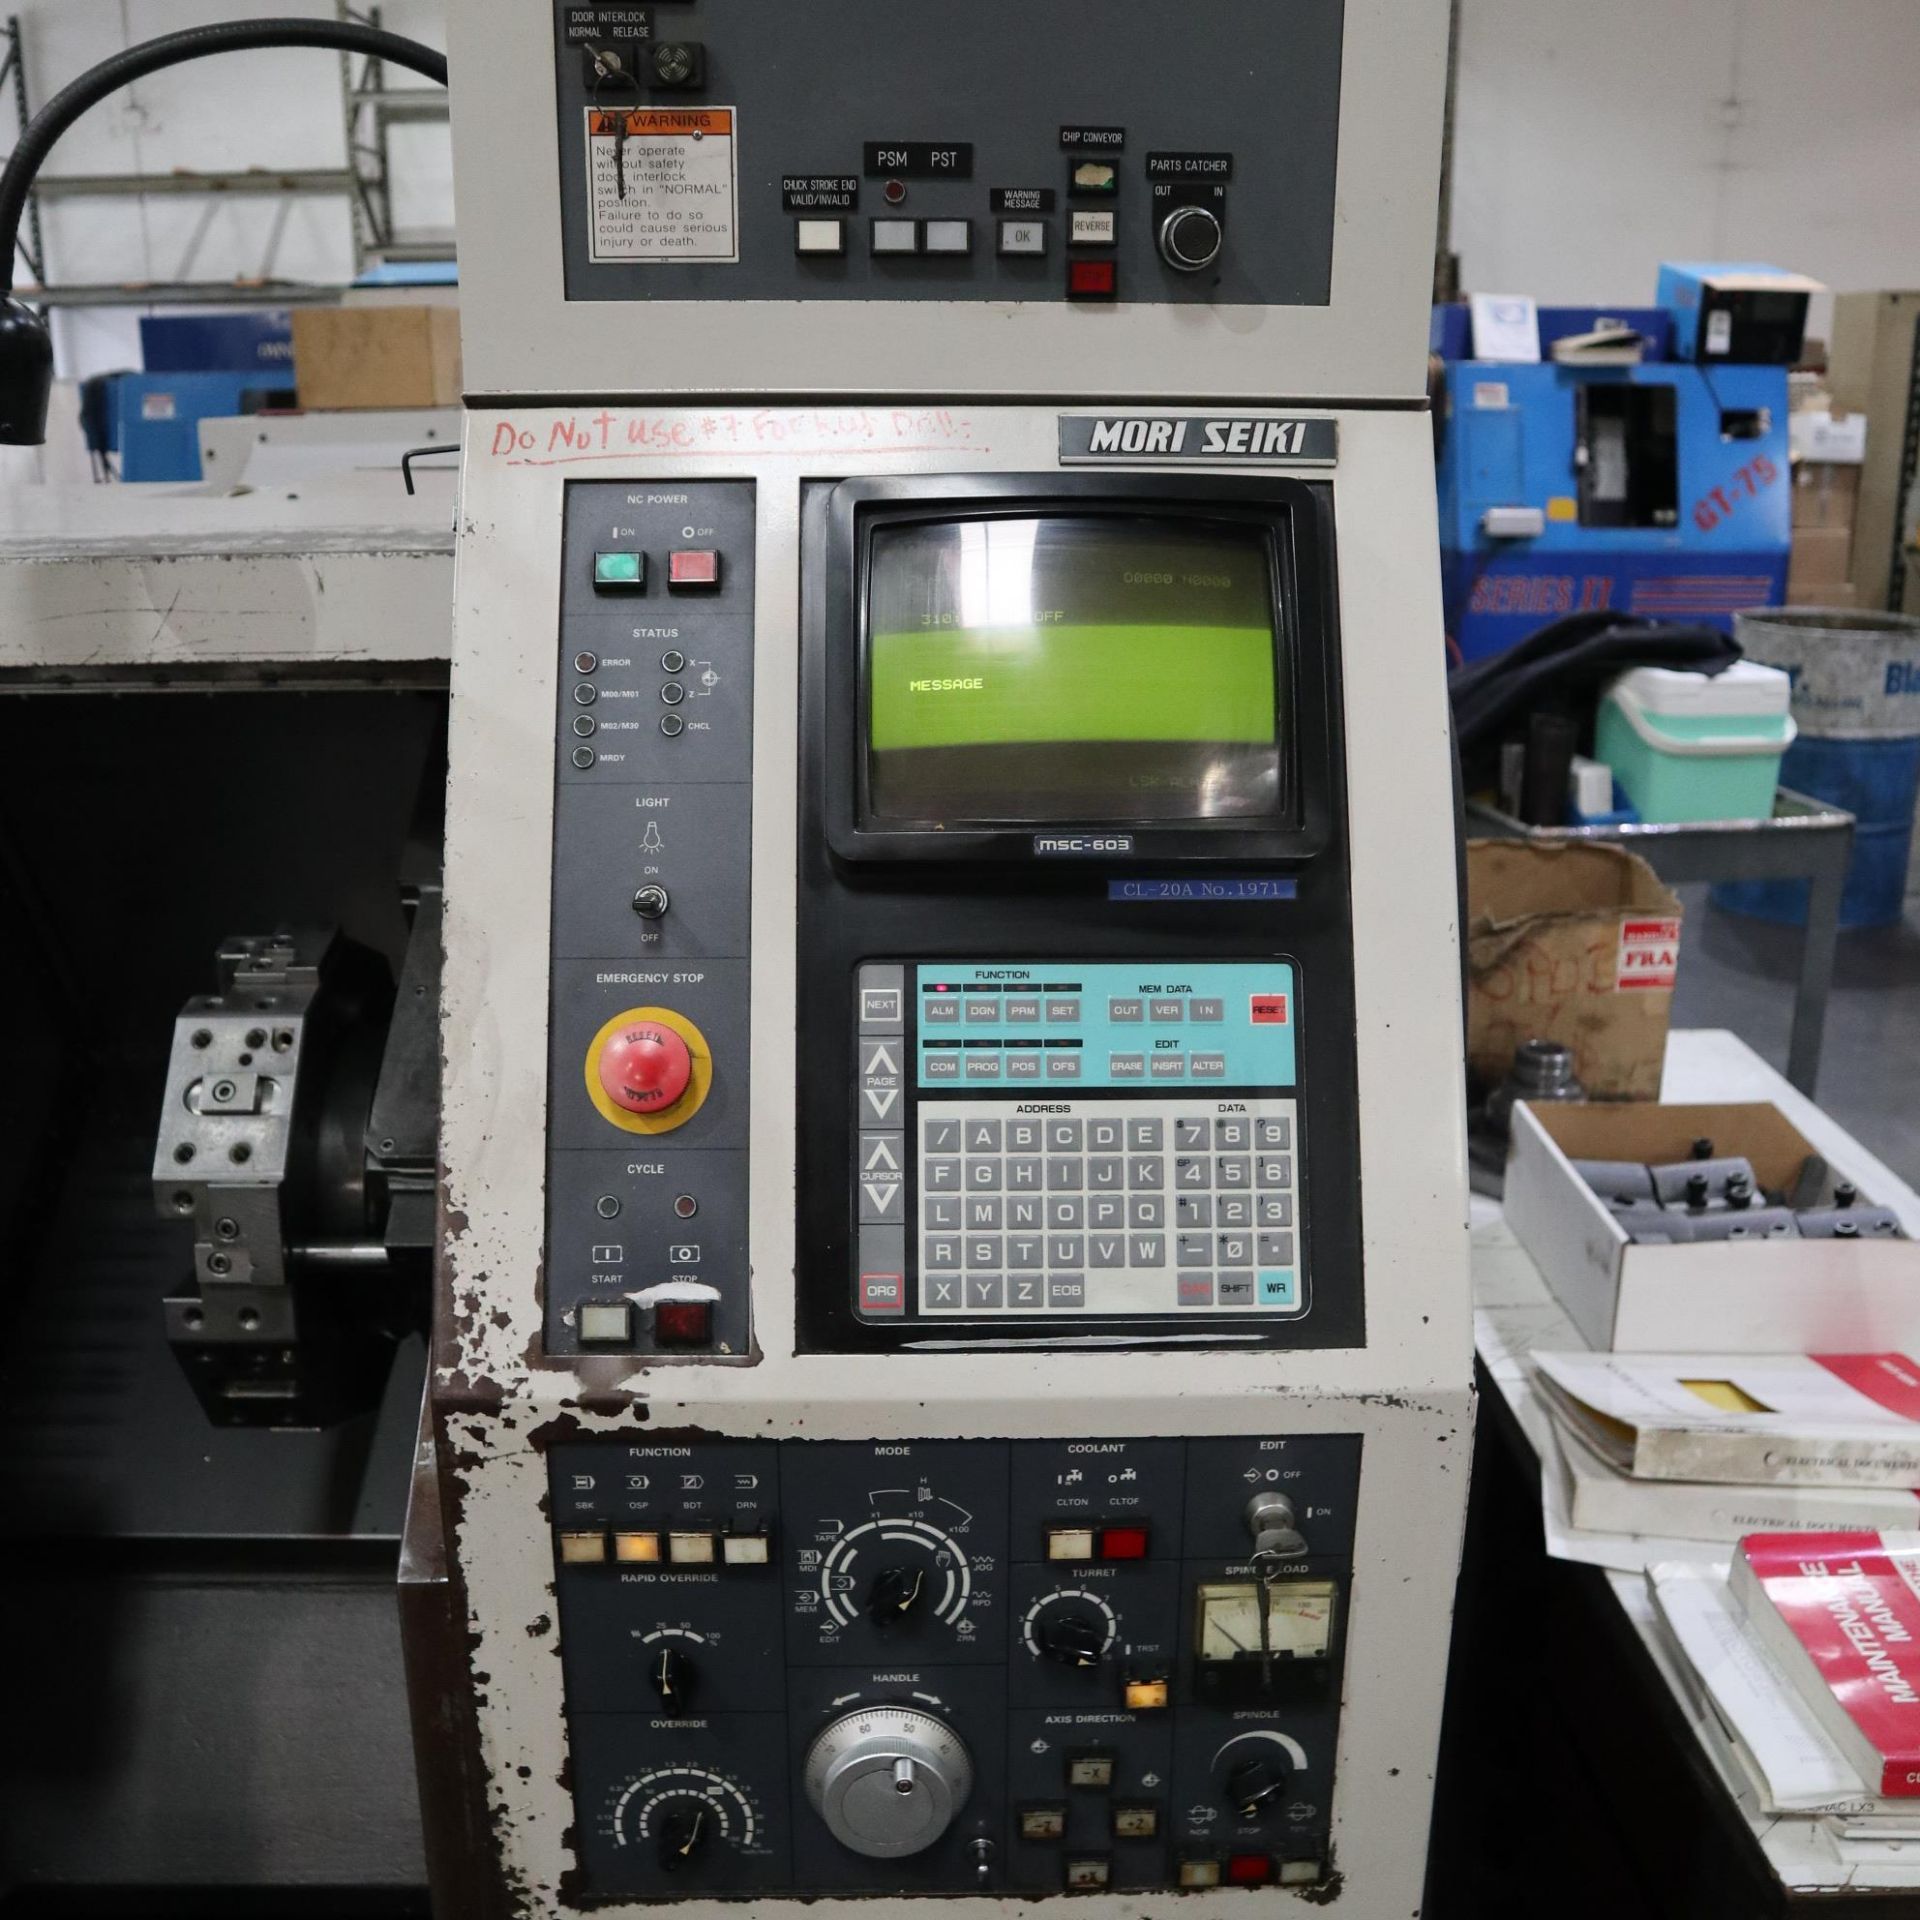 1996 MORI SEIKI CL-20A CNC LATHE, S/N 1971, TOOL SETTER, COLLET CHUCK, YASNAC CONTROL, MANUALS, TOOL - Image 6 of 10